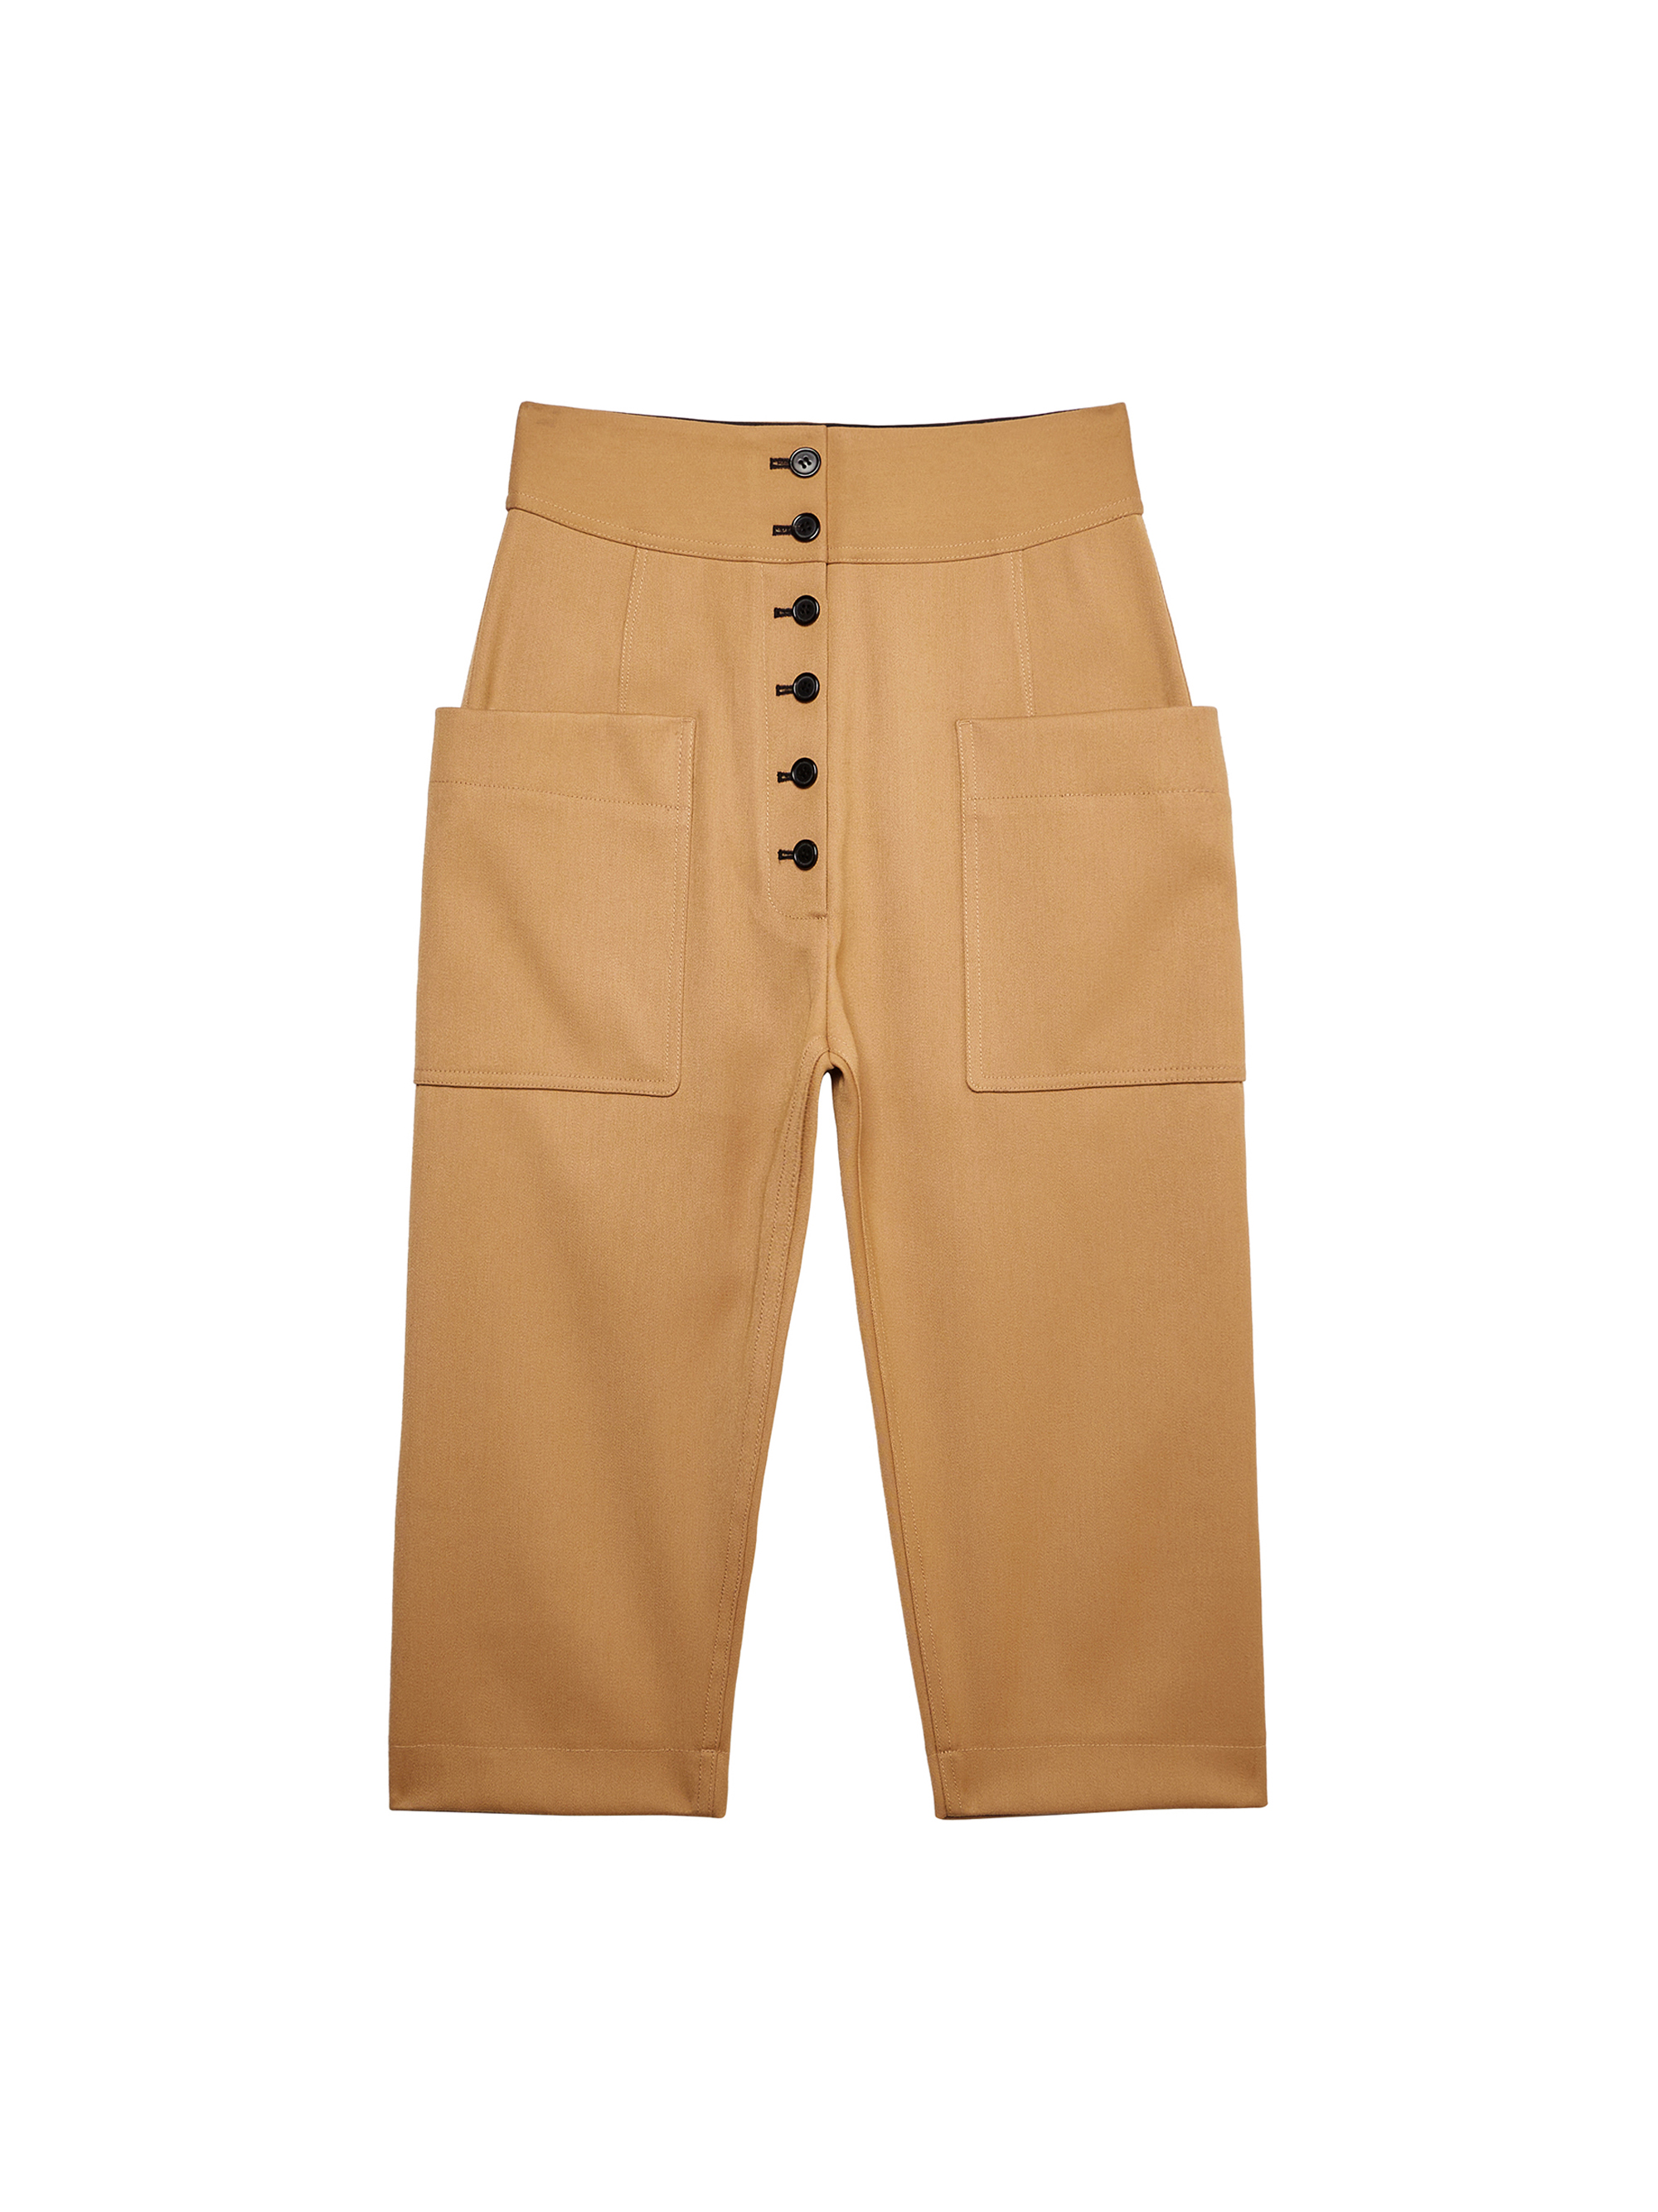 Button-up Cropped Baggy Pants / 버튼-업 크롭 배기 팬츠